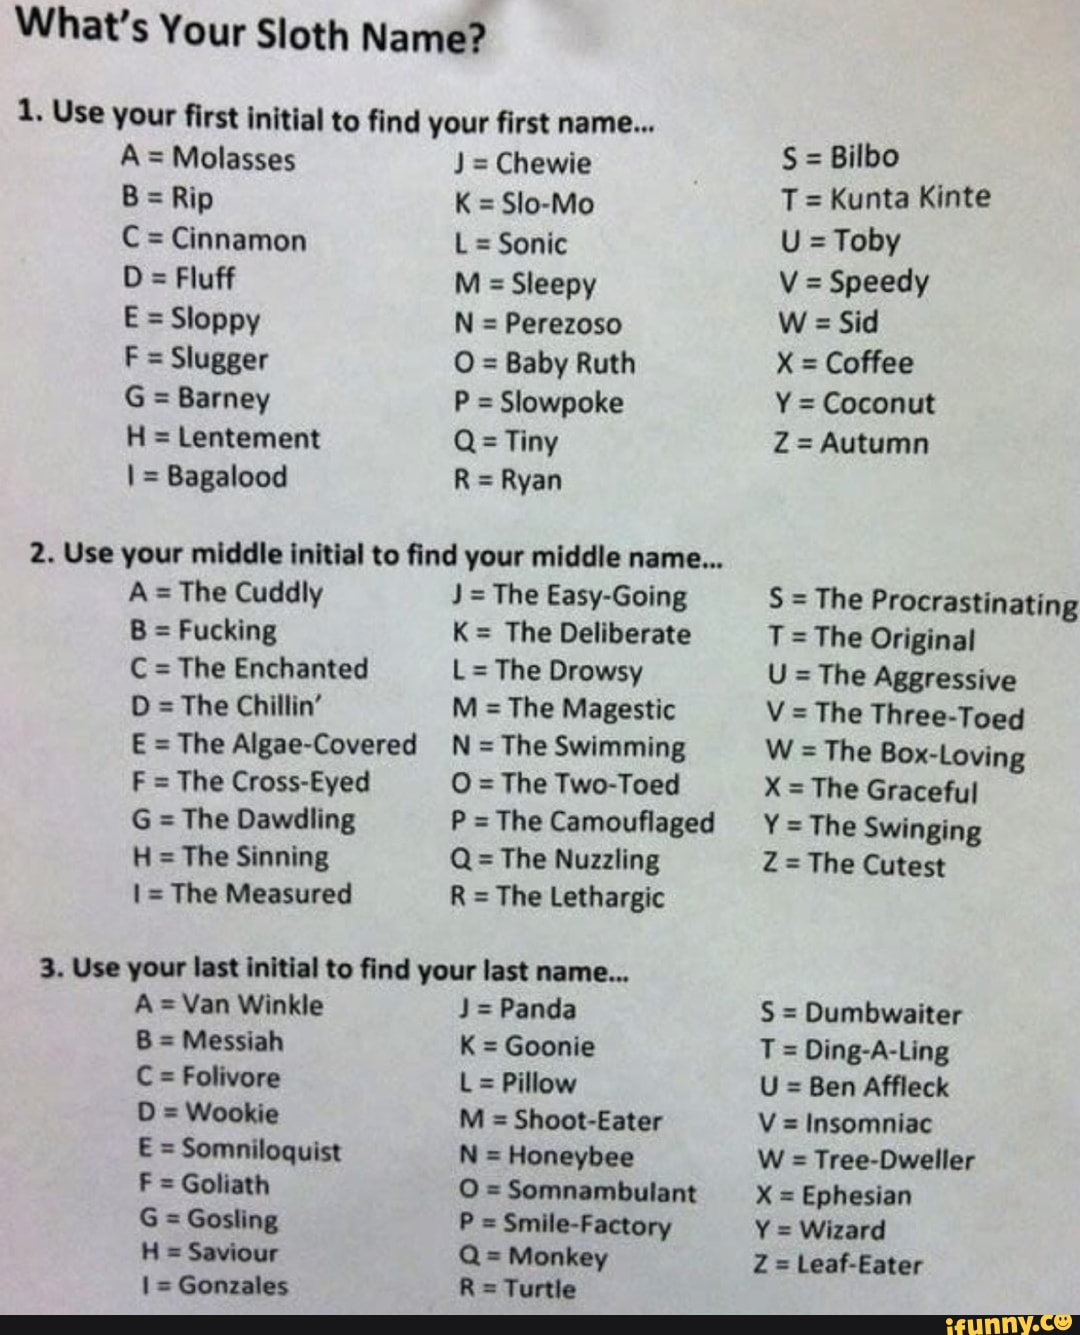 What S Your Sloth Name 1 Use Your ﬁrst Initial To Find Your First Name A Molasses J Chewie 5 Bilbº C Cinnamon L Sonic U Toby